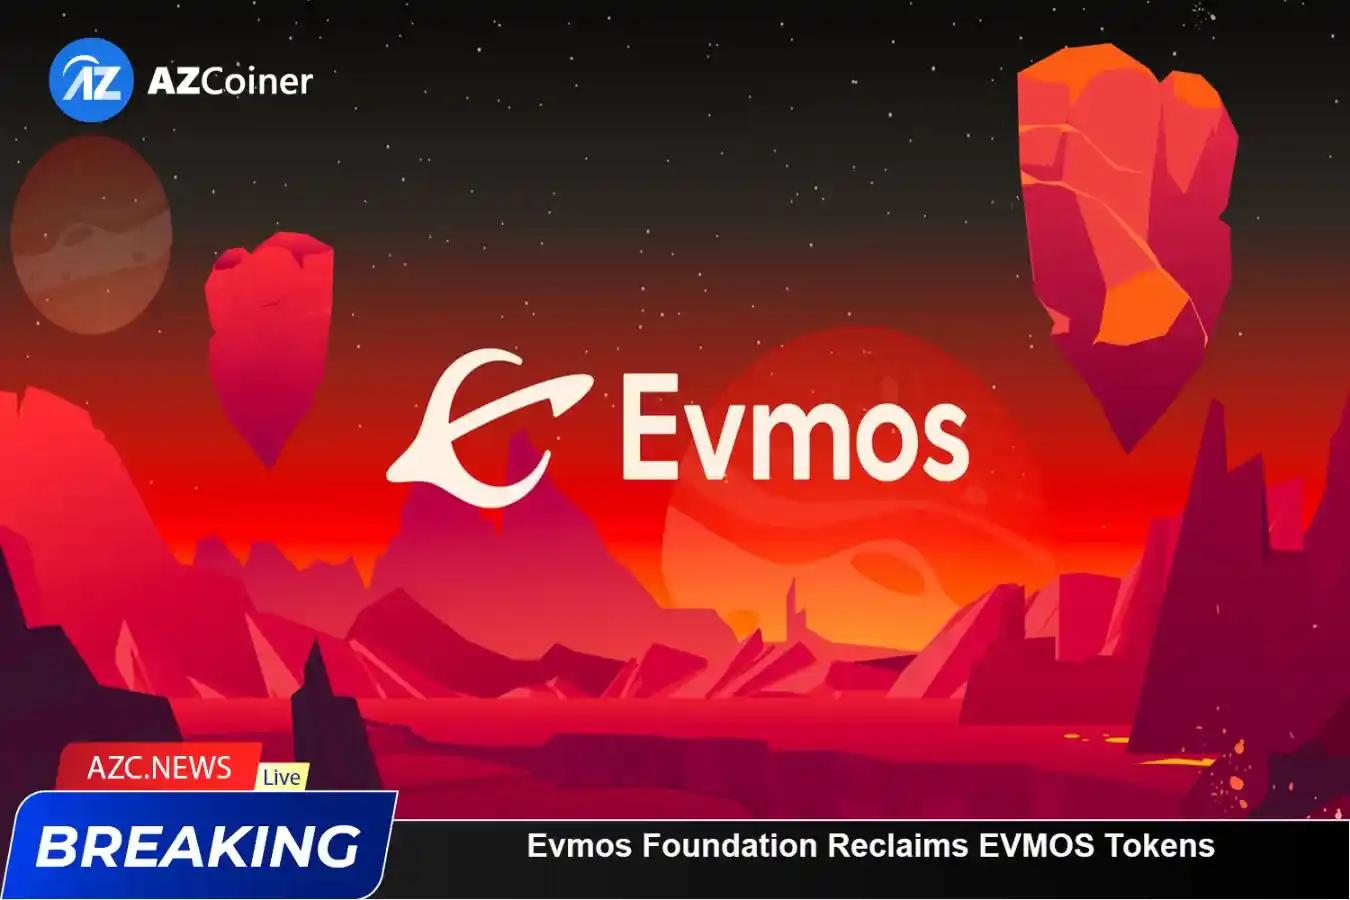 Evmos Foundation Reclaims A Large Amount Of Evmos Tokens_65b974fed1718.webp